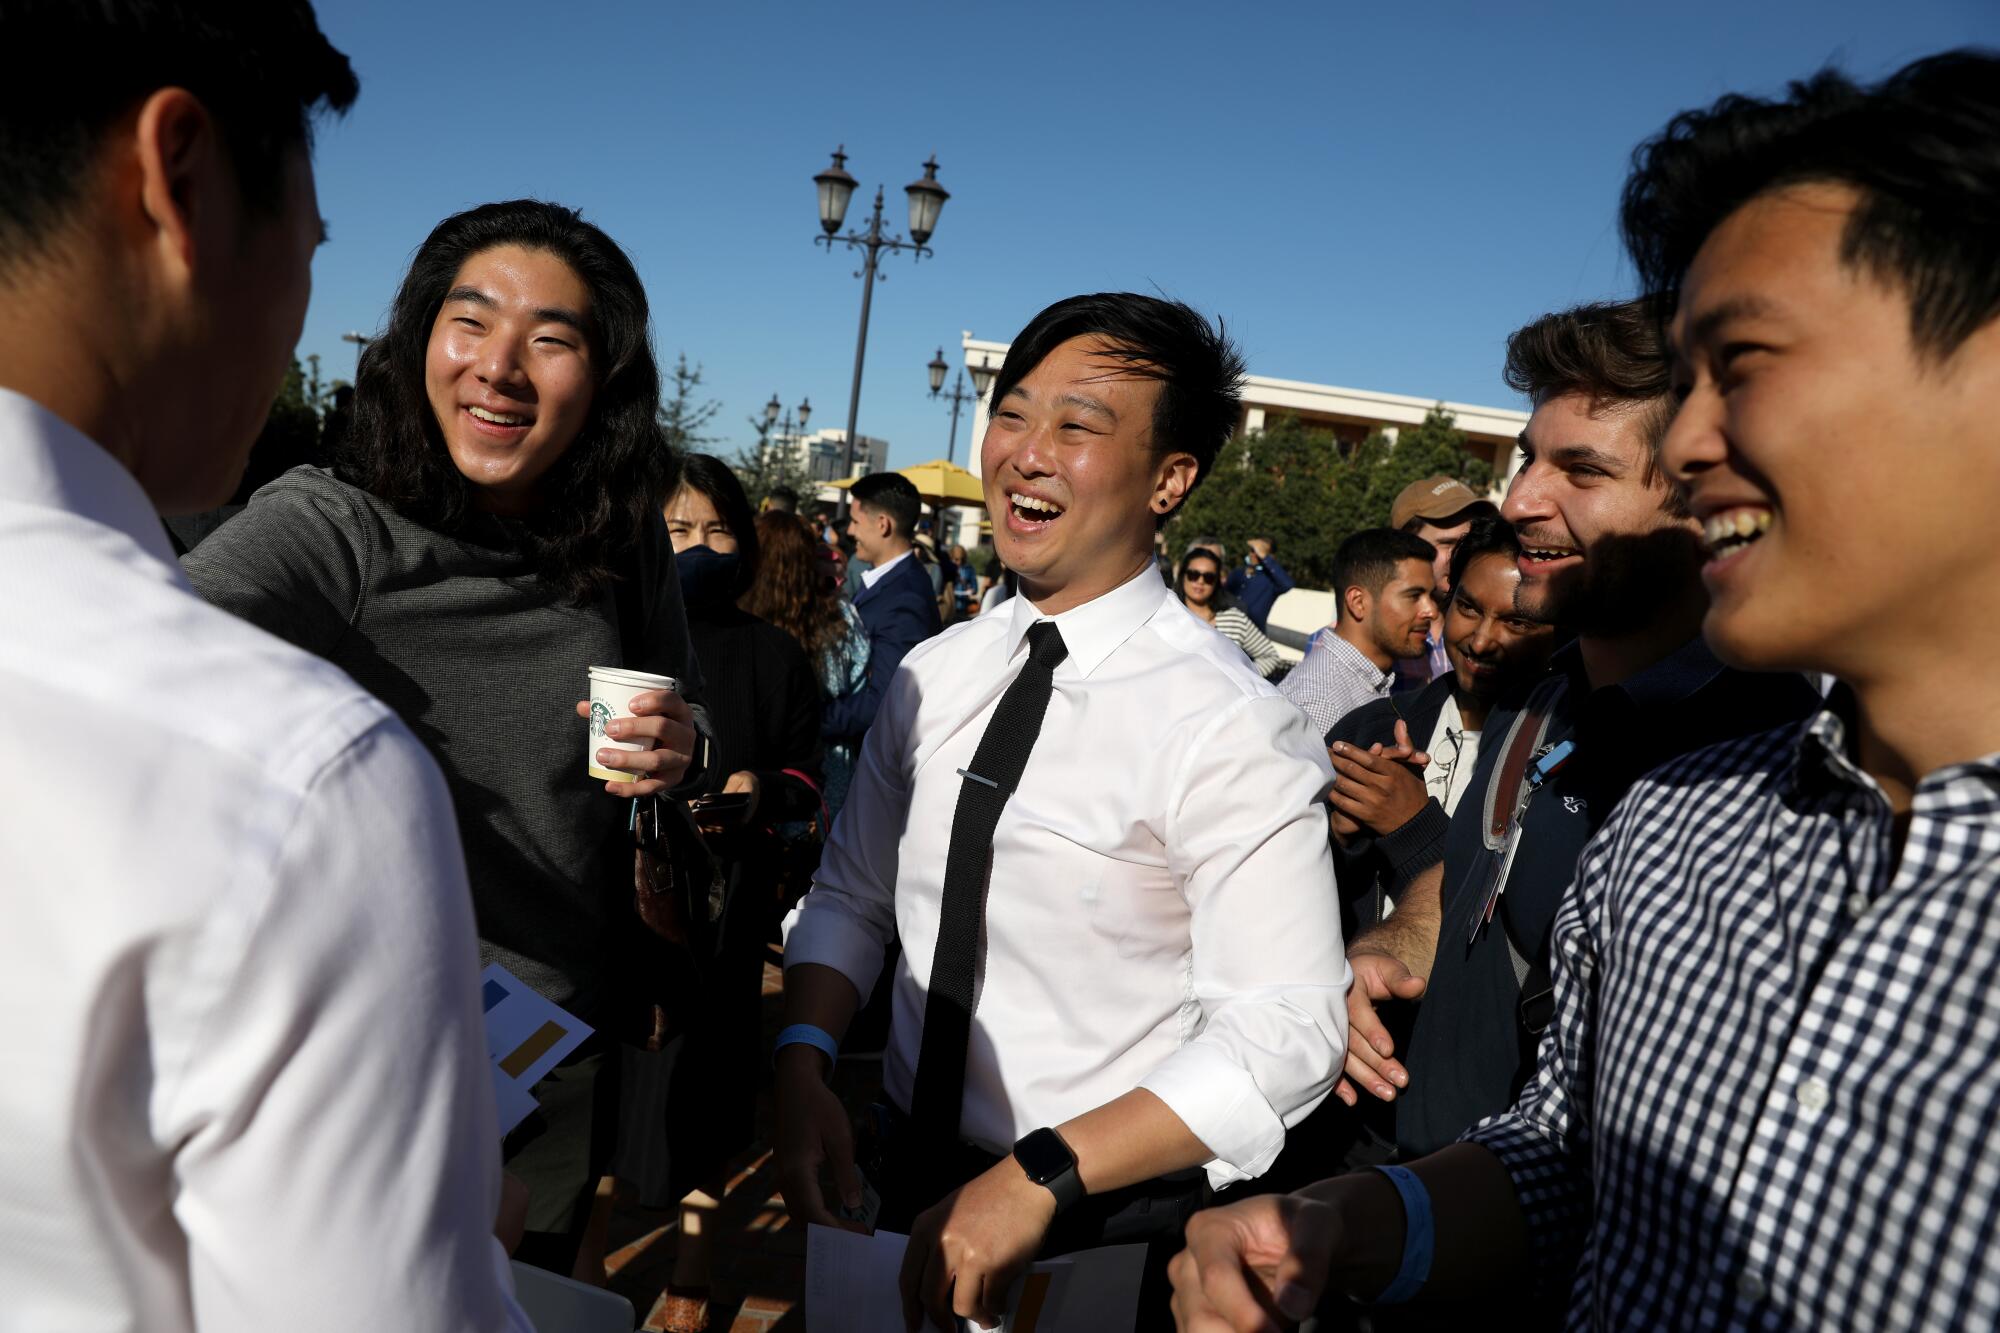 UCLA medical students talk and laugh outdoors